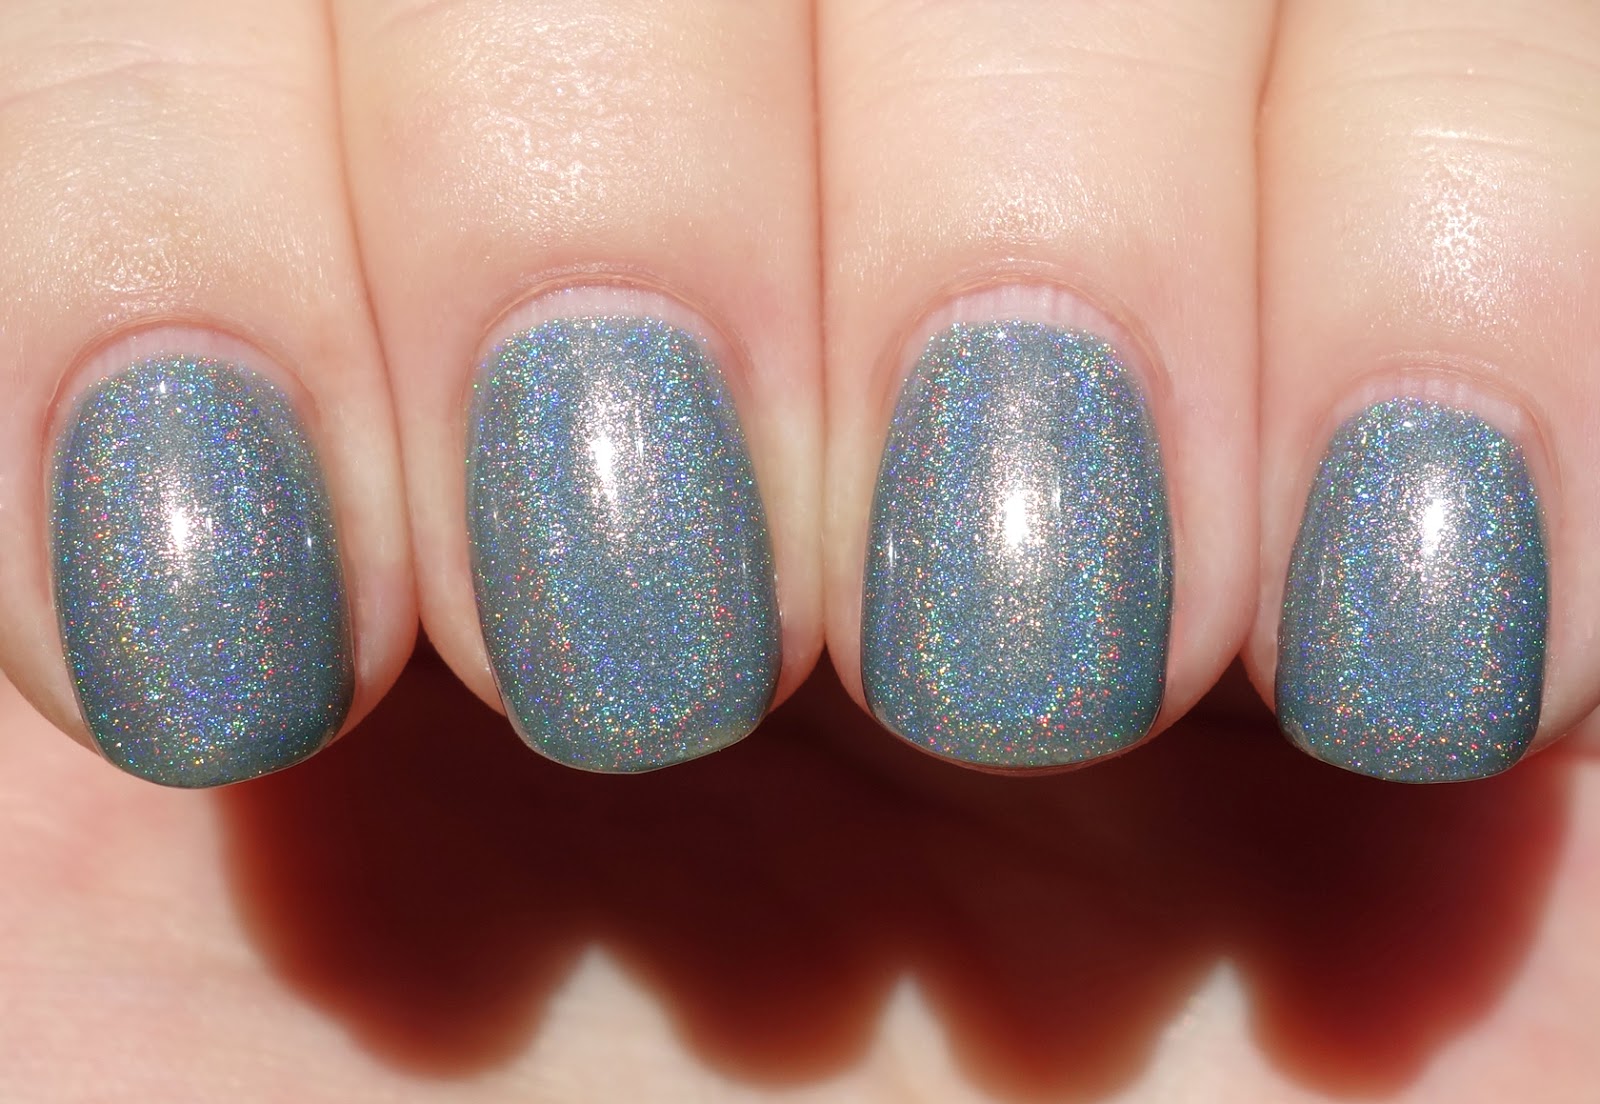 1. OPI Nail Lacquer in "Fire and Ice" - wide 2